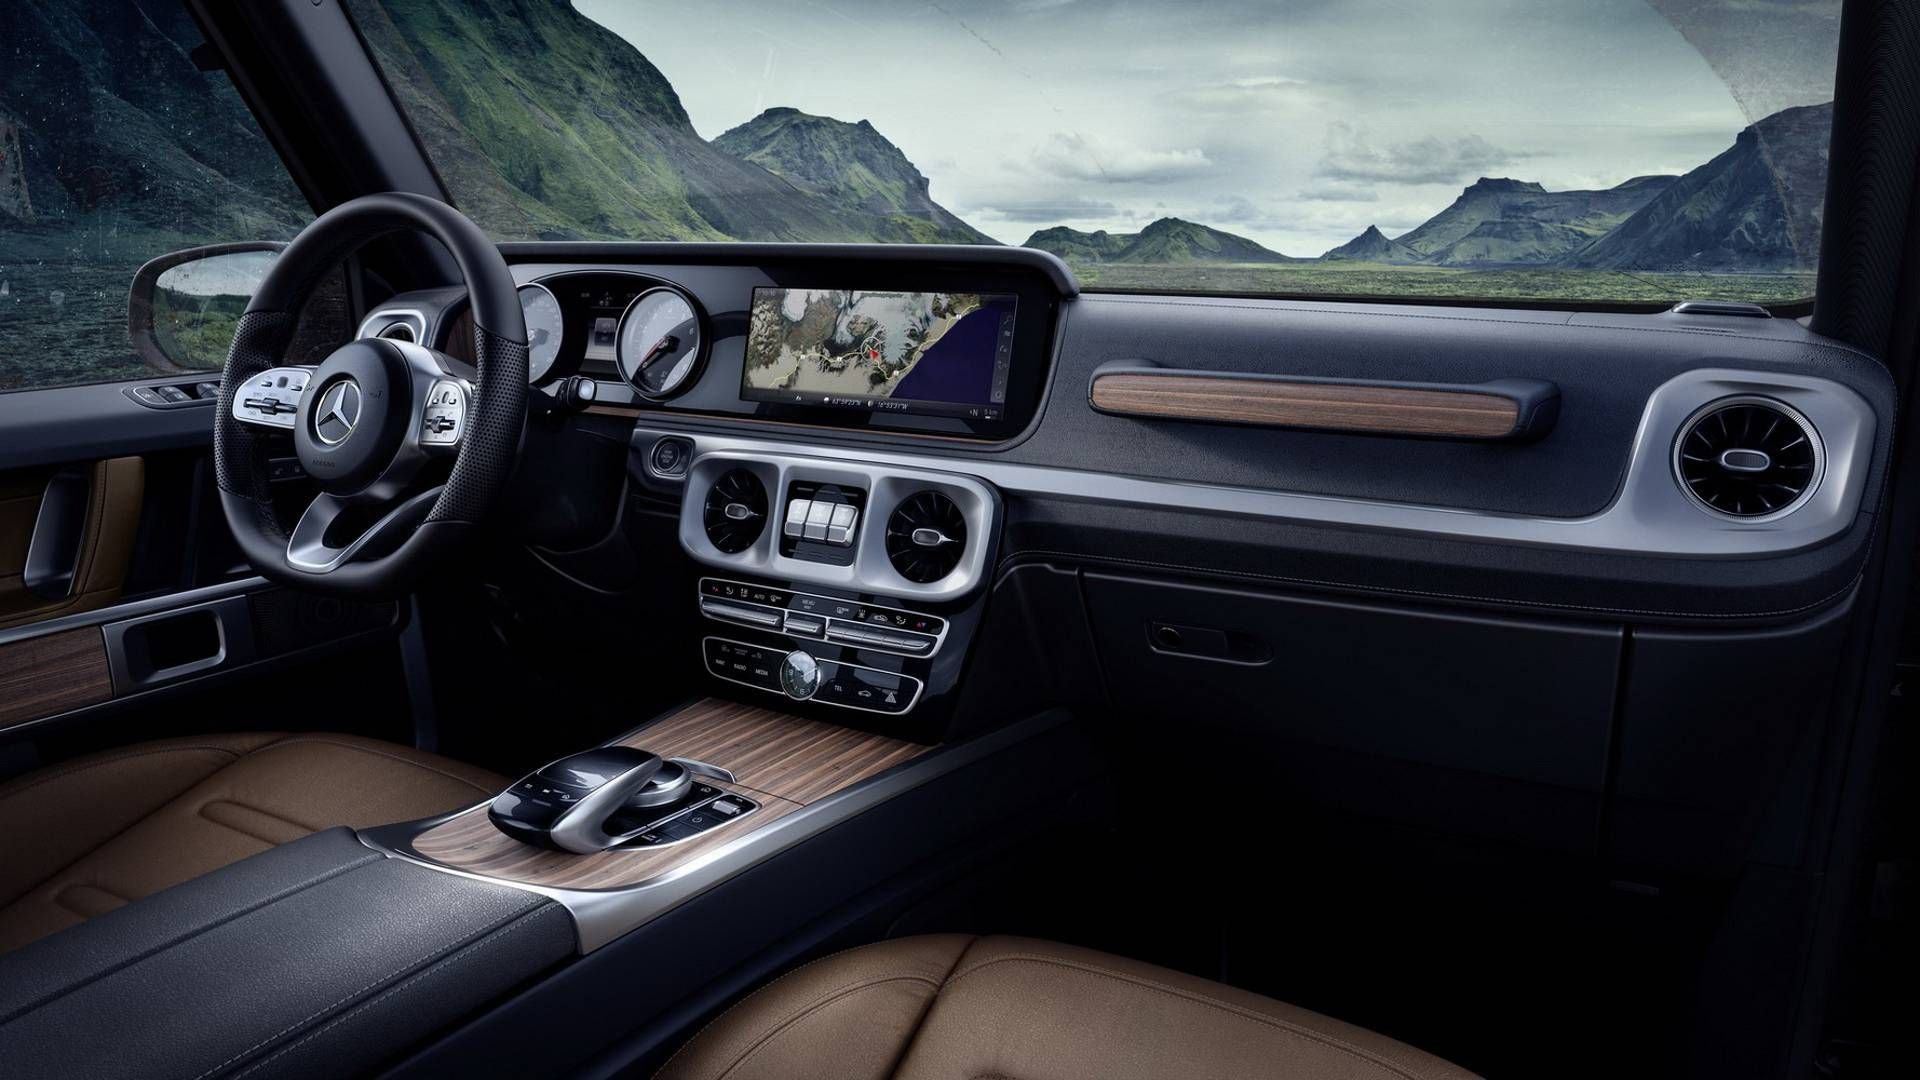 Interior cabin view of the 2019 Mercedes G-class vehicle